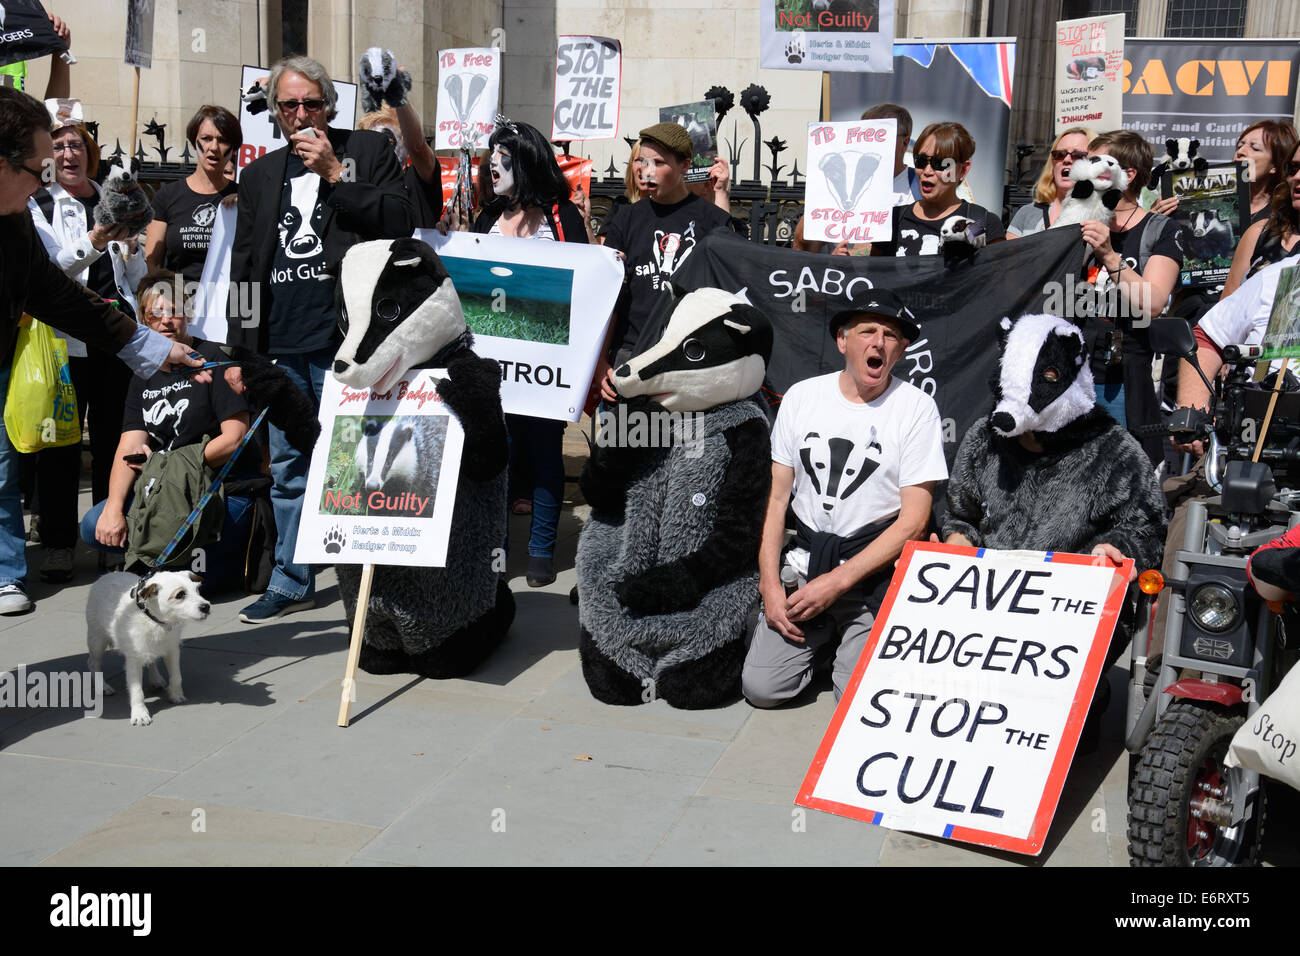 Badger Cull Protest, Royal Court, London, England. Stock Photo